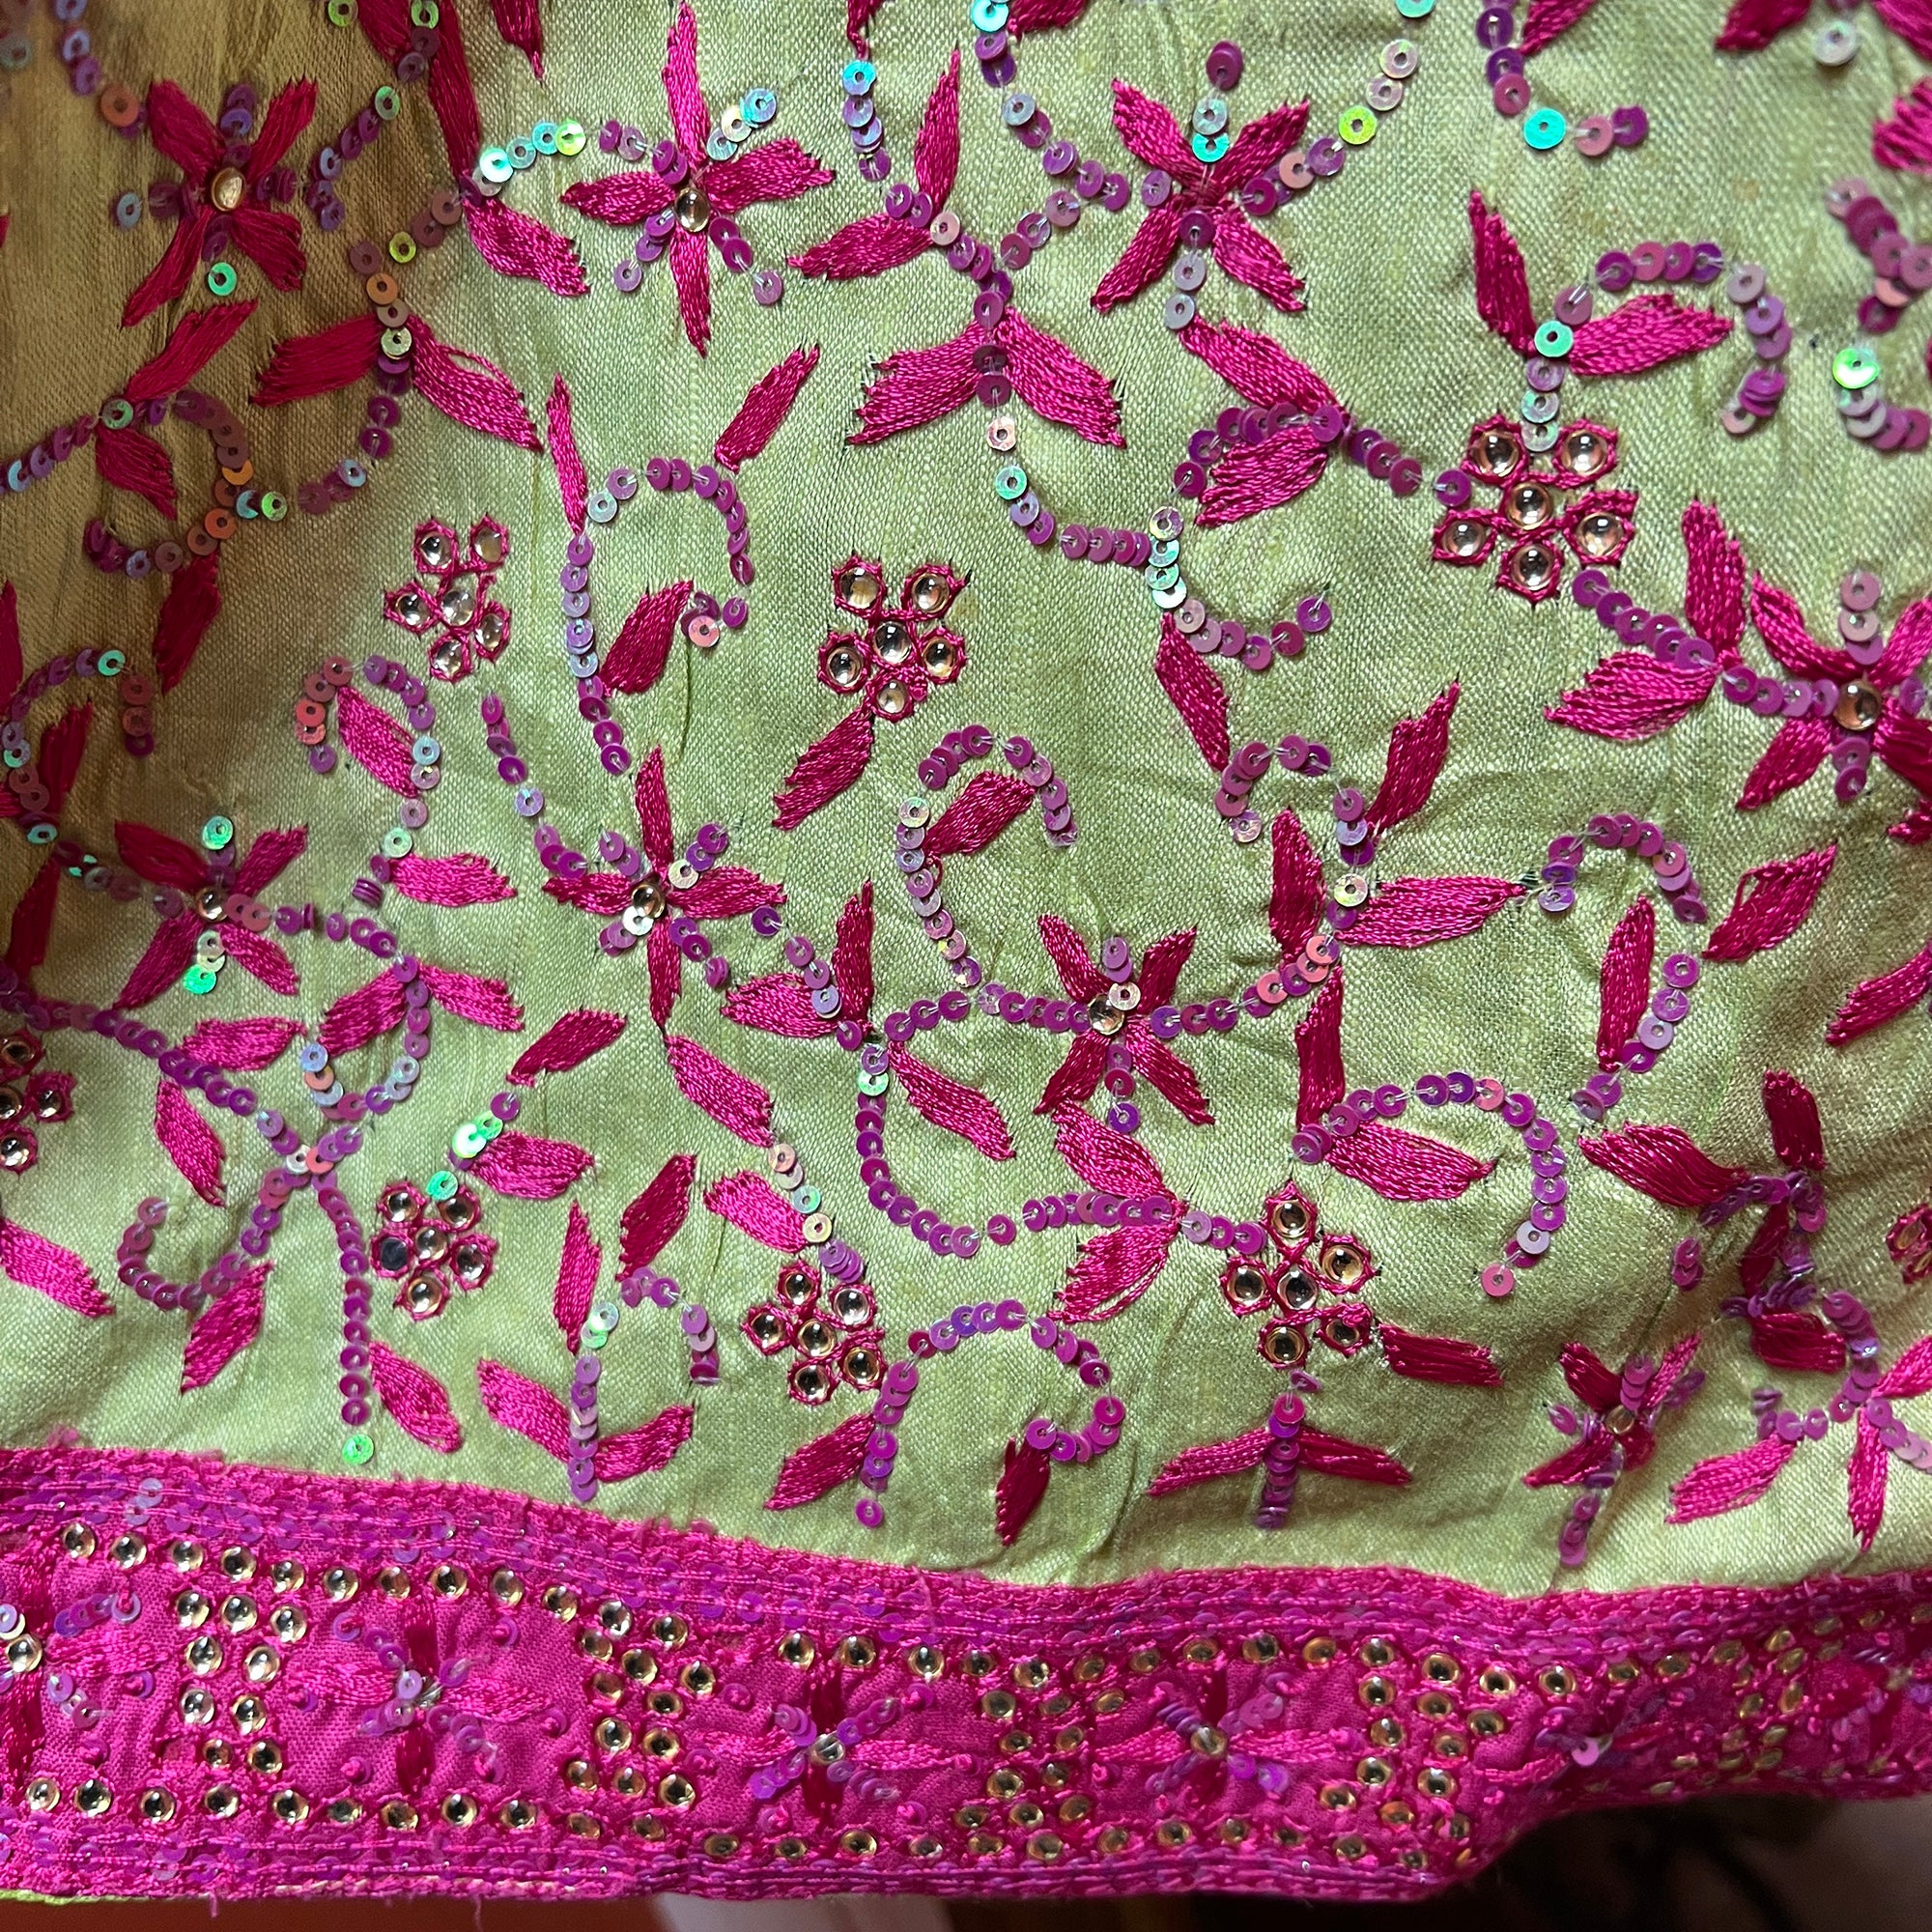 Vintage Mint Kurti with Bright Pink Embroidery - Vintage India NYC